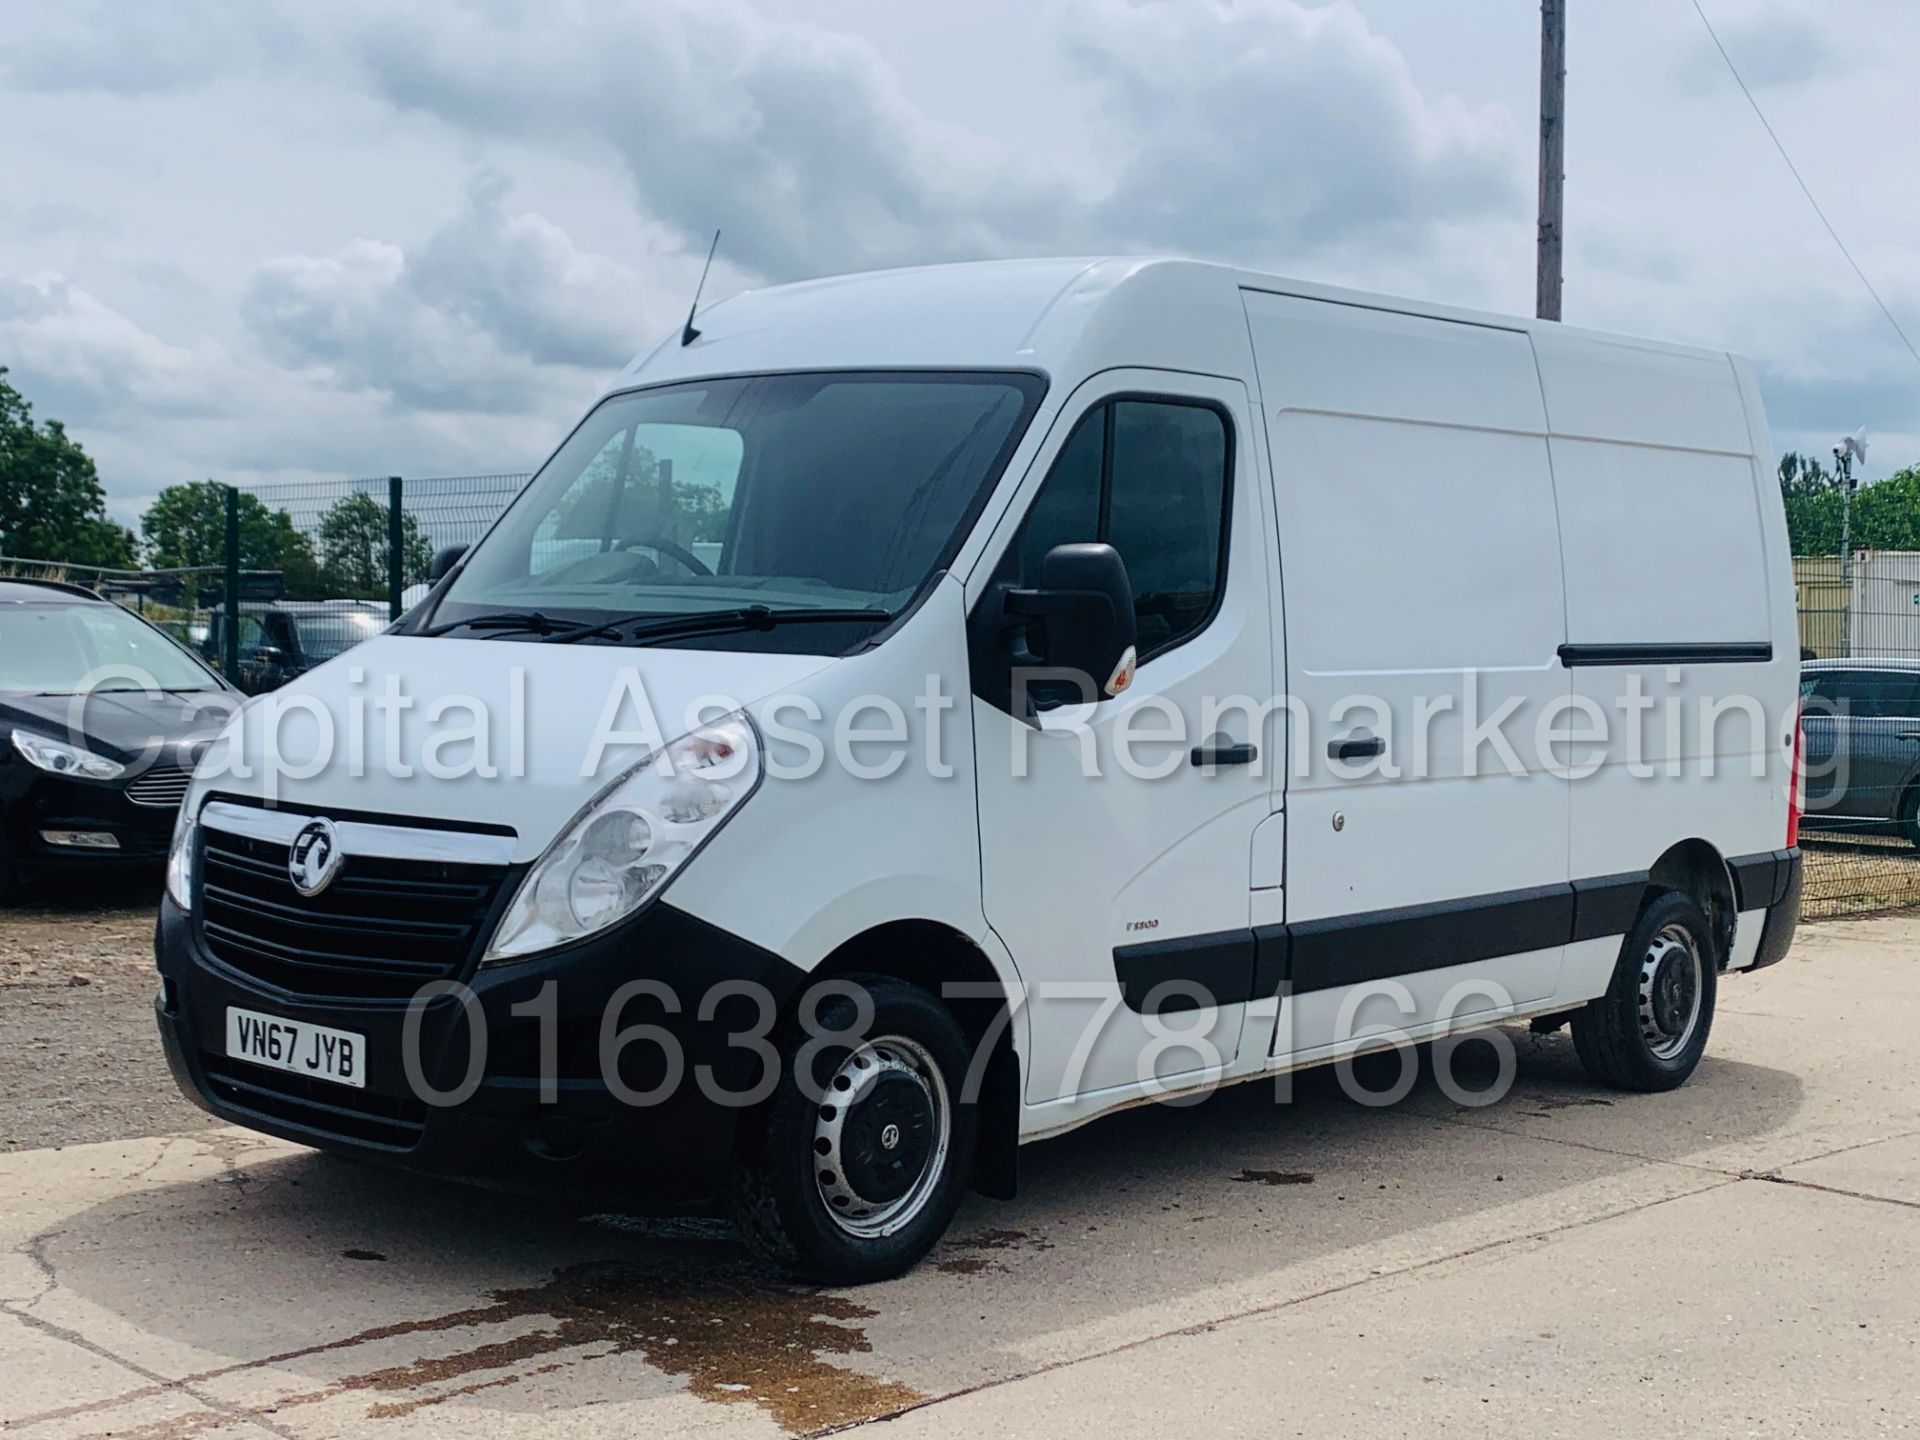 (ON SALE) VAUXHALL MOVANO *MWB HI-ROOF* (2018 - EURO 6) '2.3 CDTI - 130 BHP - 6 SPEED' (1 OWNER) - Image 6 of 39